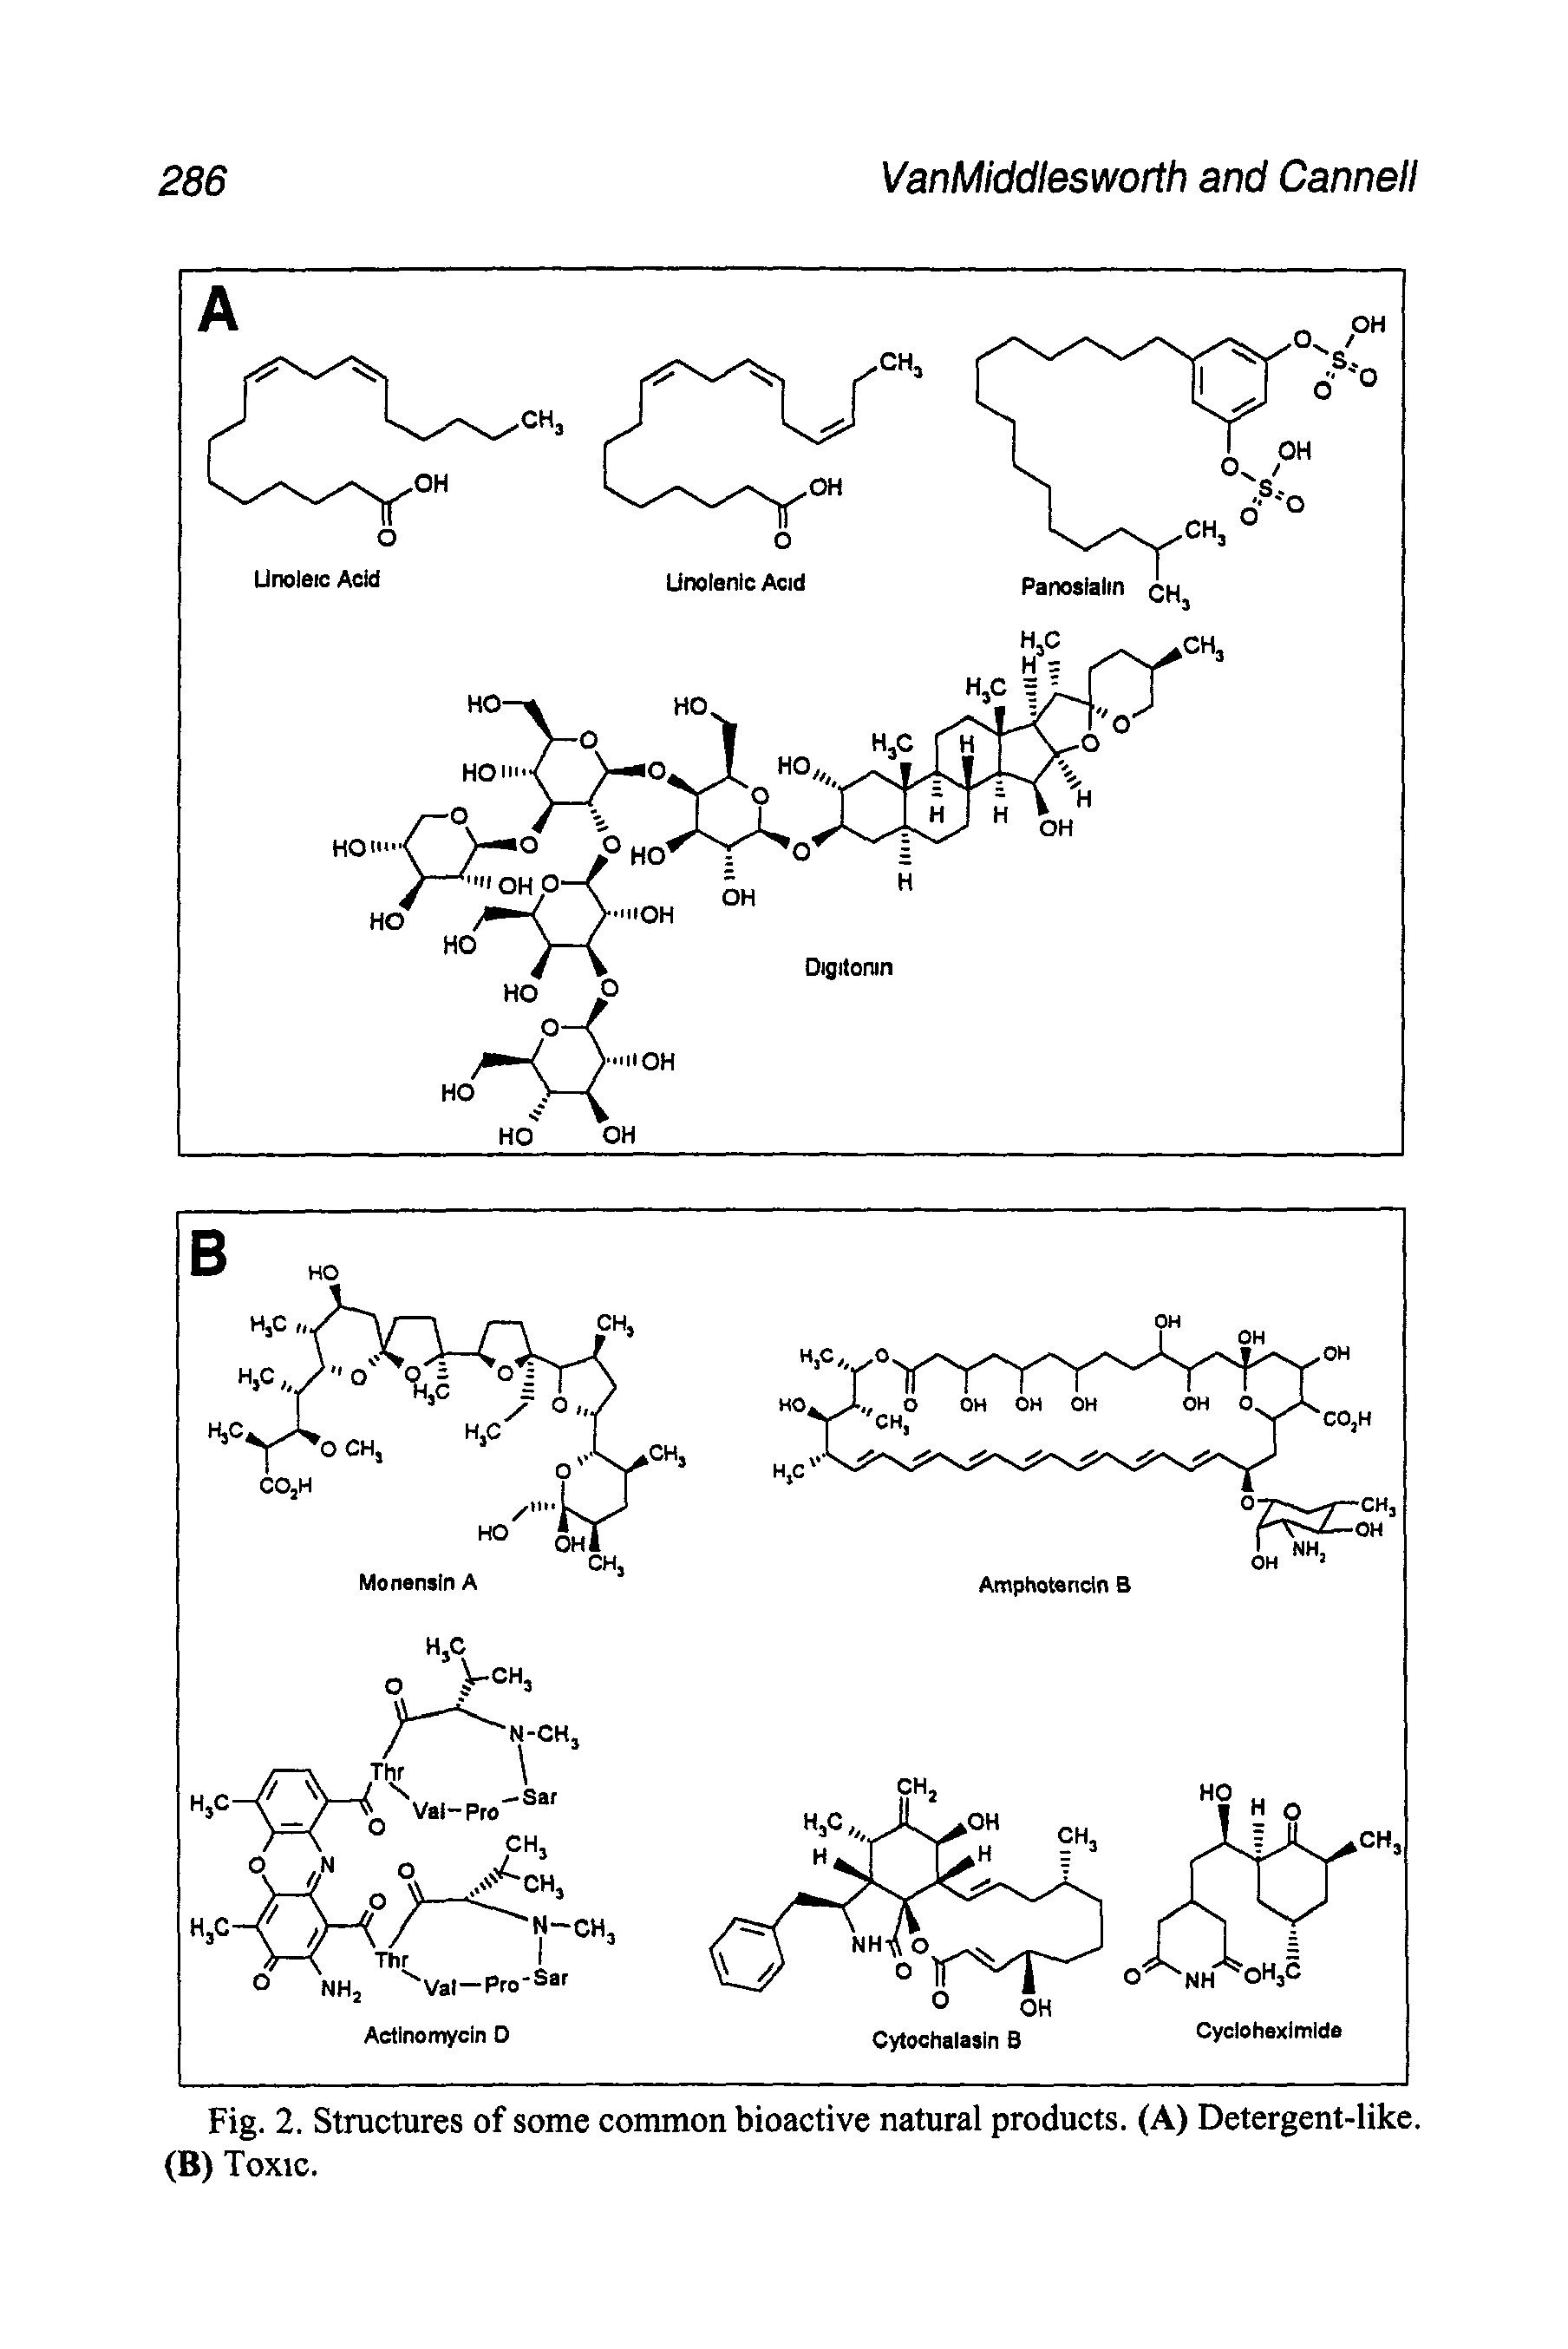 Fig. 2. Structures of some common bioactive natural products. (A) Detergent-like. (B) Toxic.